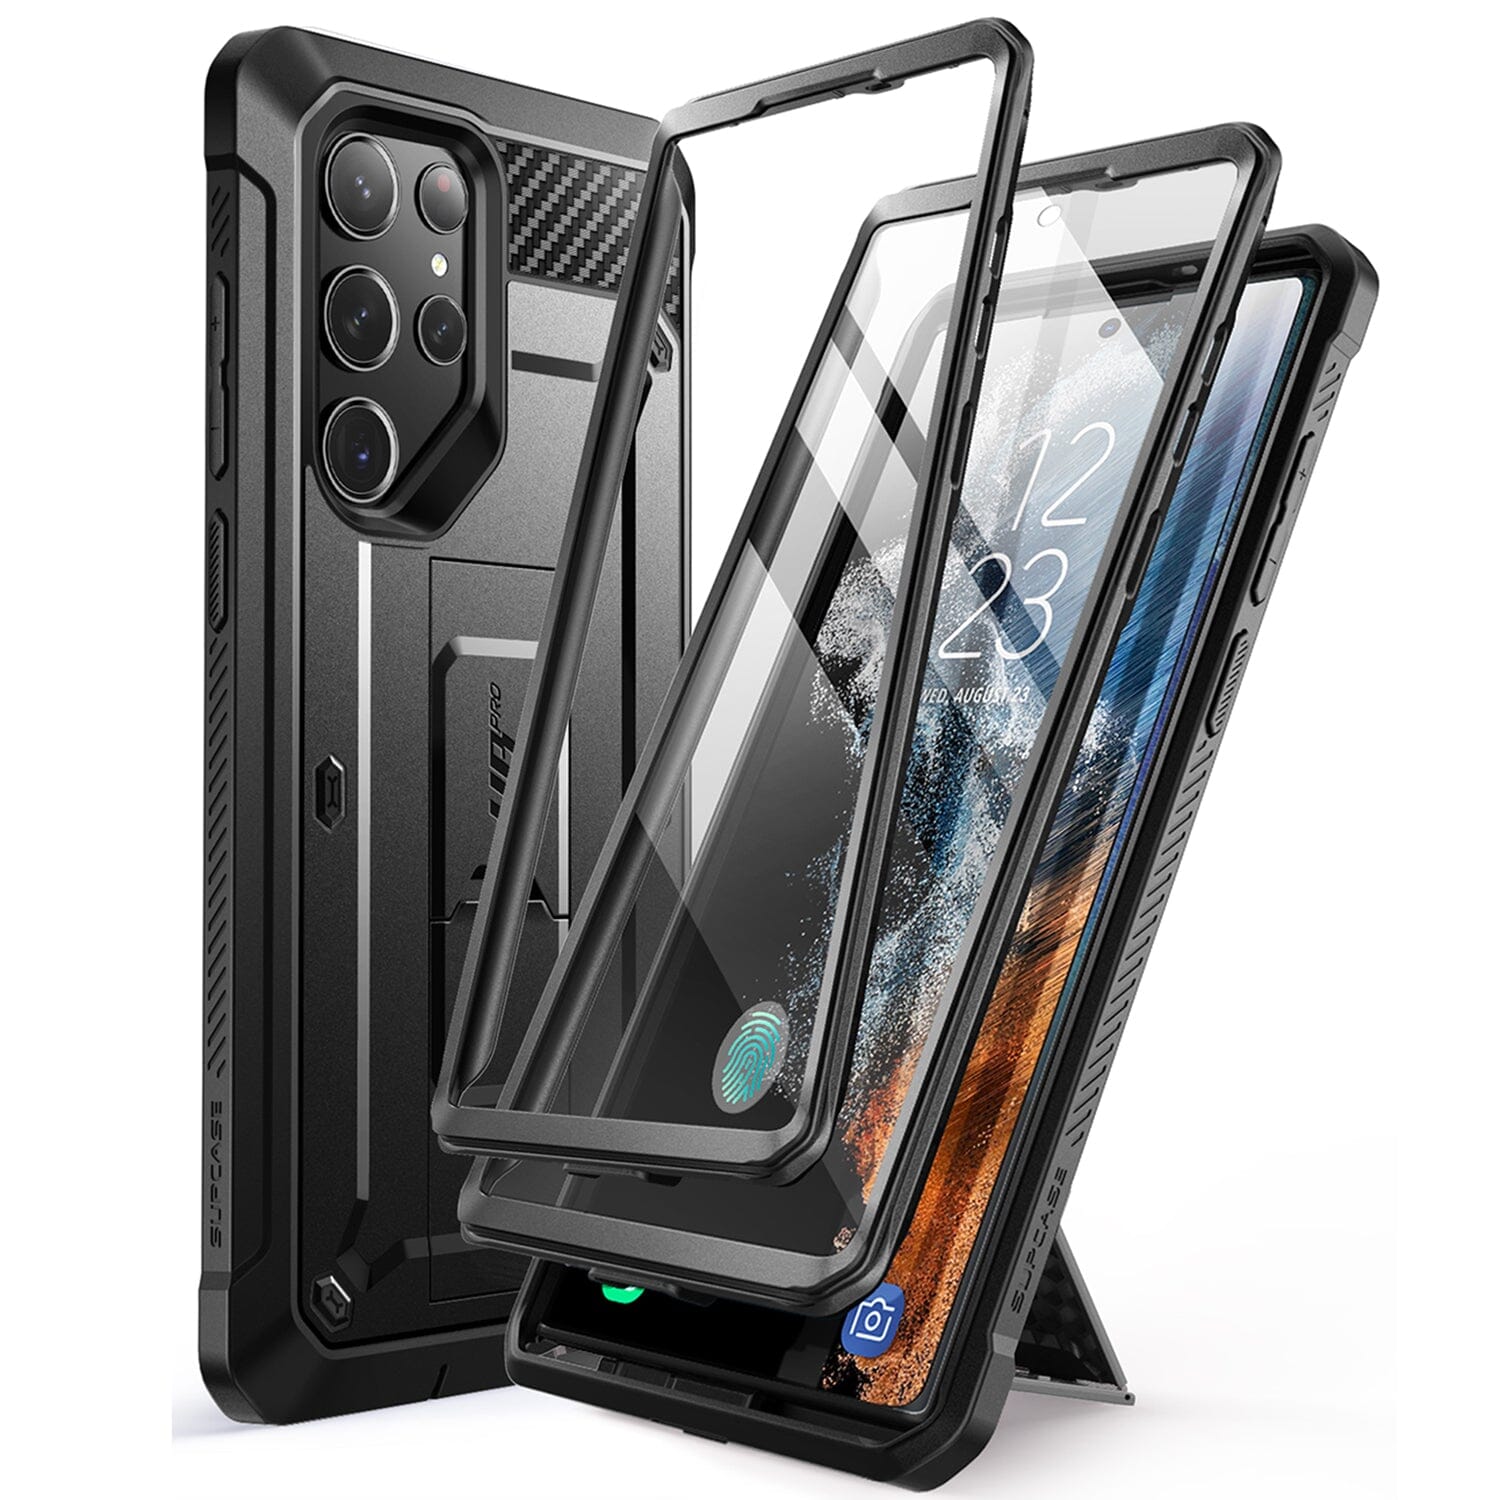 SUPCASE Unicorn Beetle Pro Case for Samsung Galaxy S23 Ultra 5G (2023 Release), [Extra Front Frame] Full-Body Dual Layer Rugged Belt-Clip & Kickstand Case with Built-in Screen Protector ONE2WORLD 